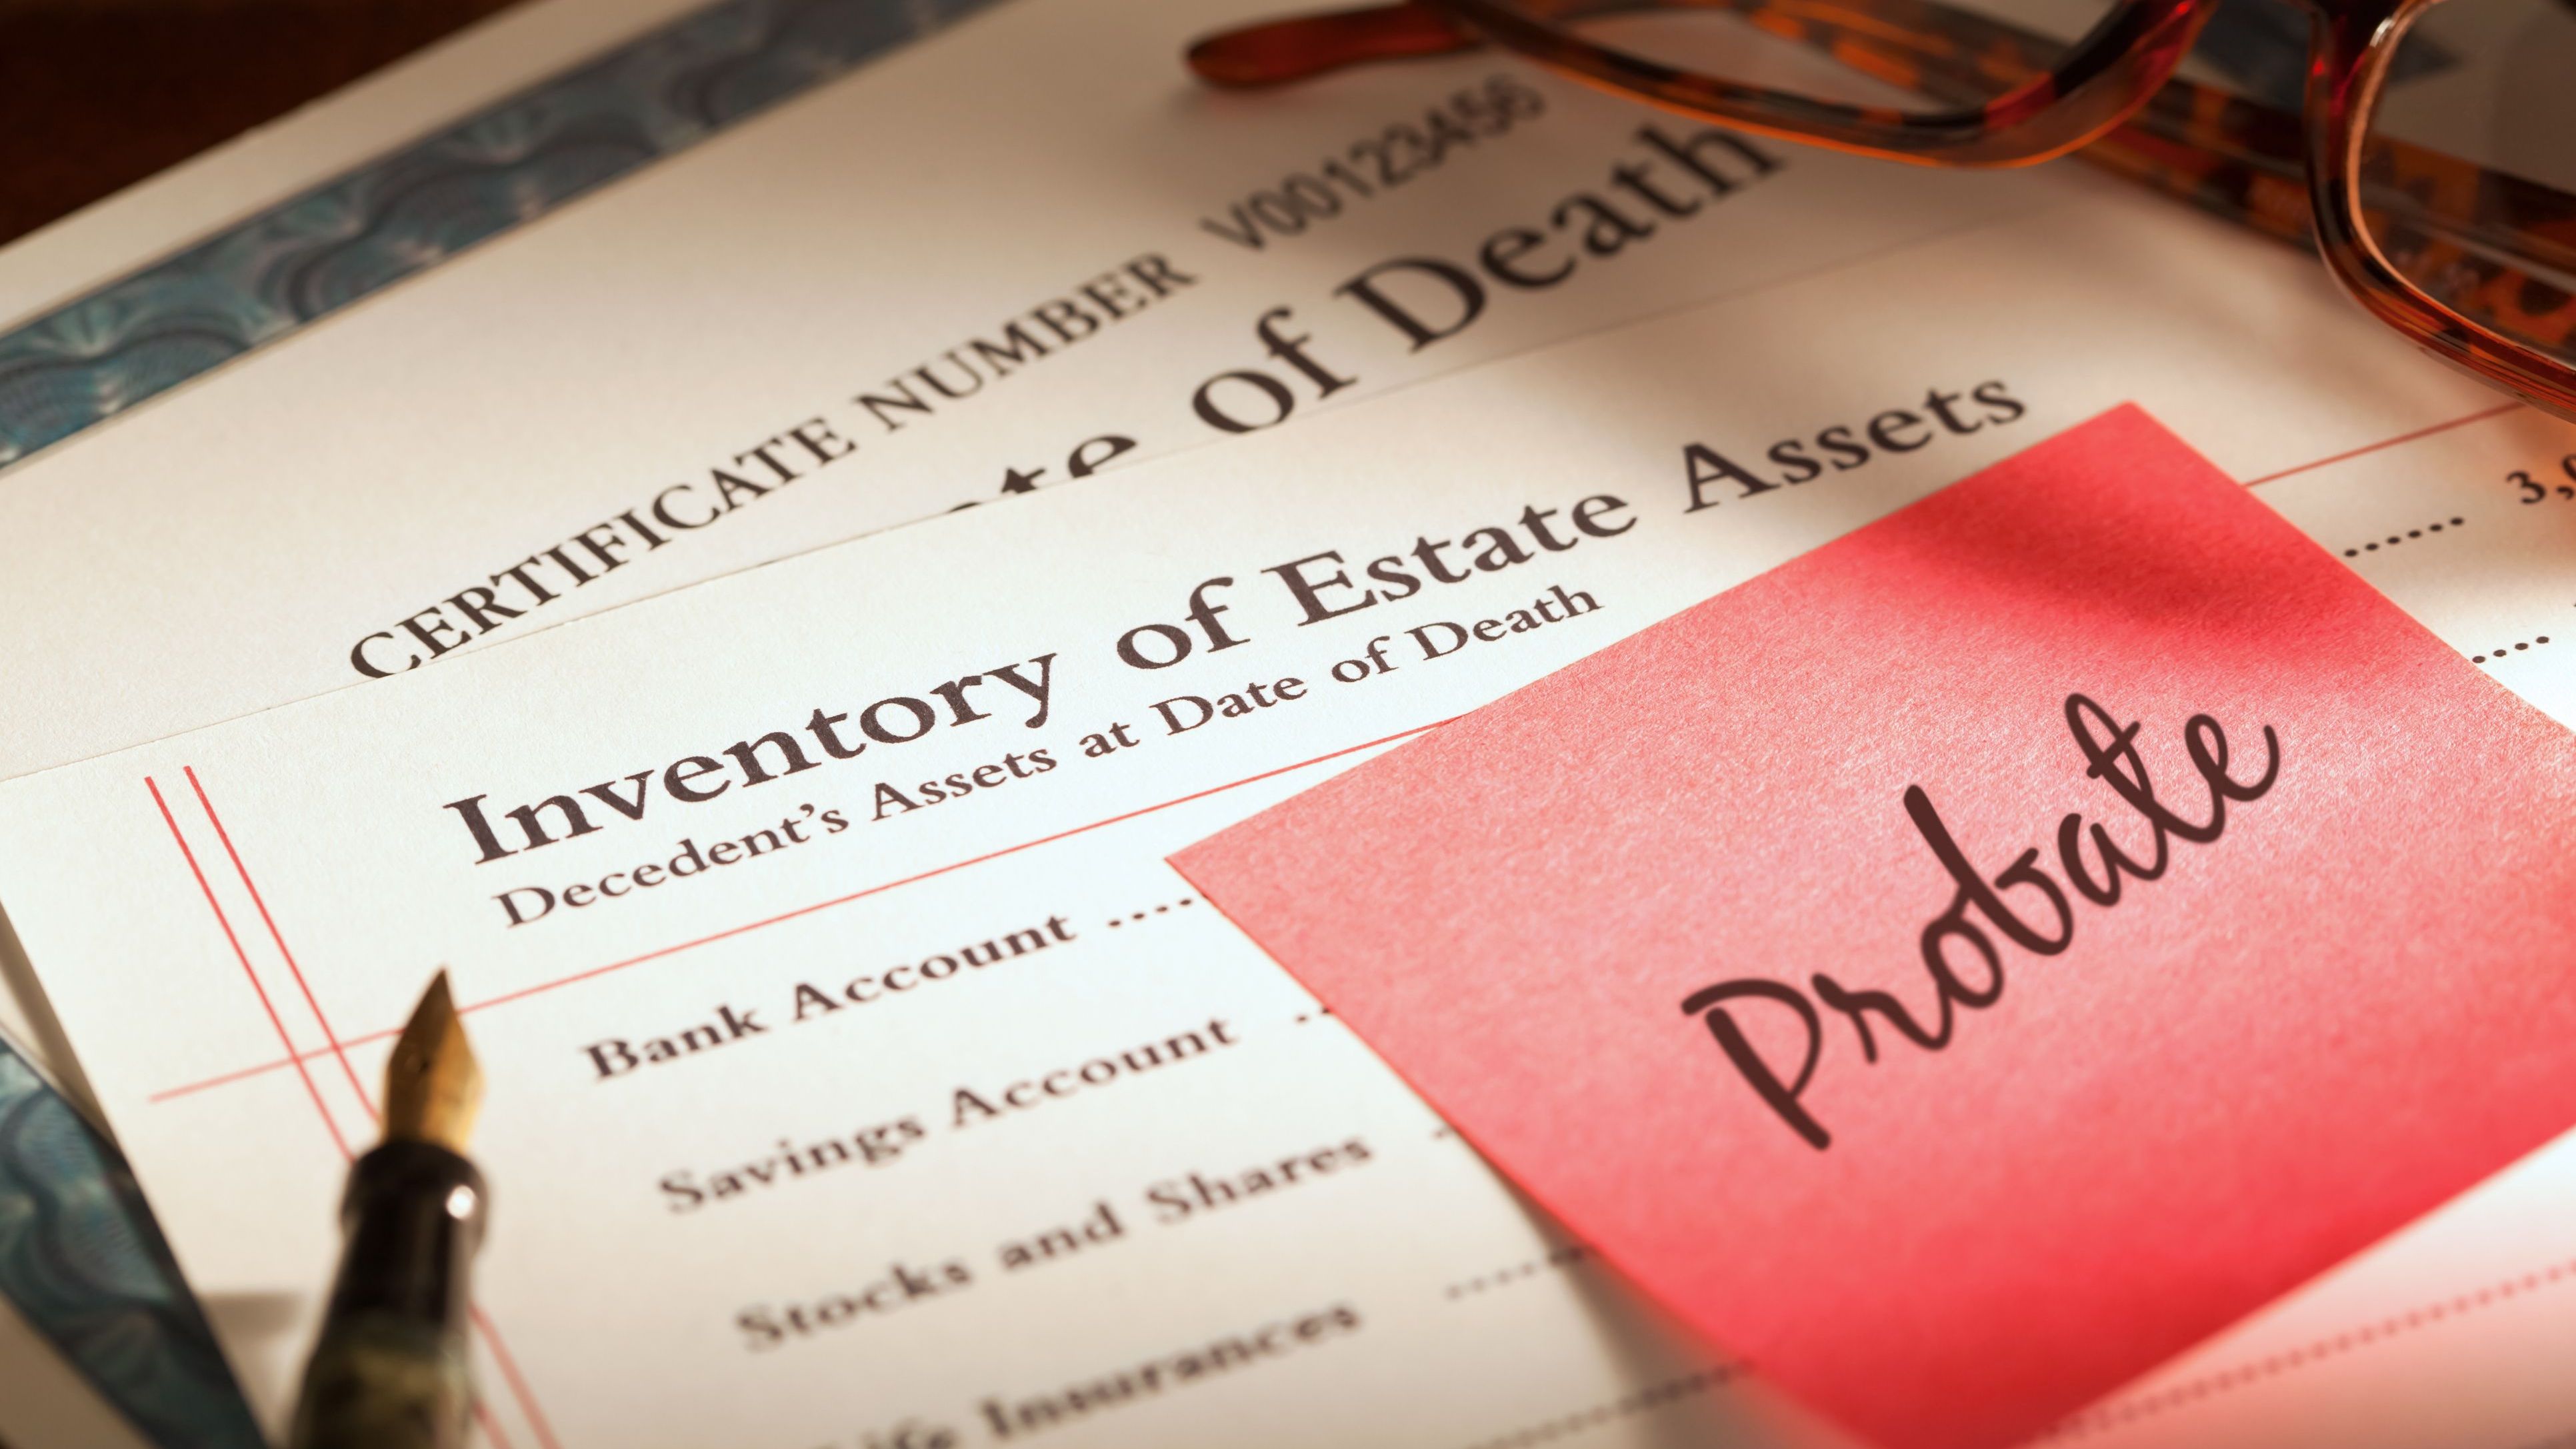 The estate process takes an inventory for the deceased person's assets, notifies any creditors and pays off debts before the remaining assets get distributed to beneficiaries.